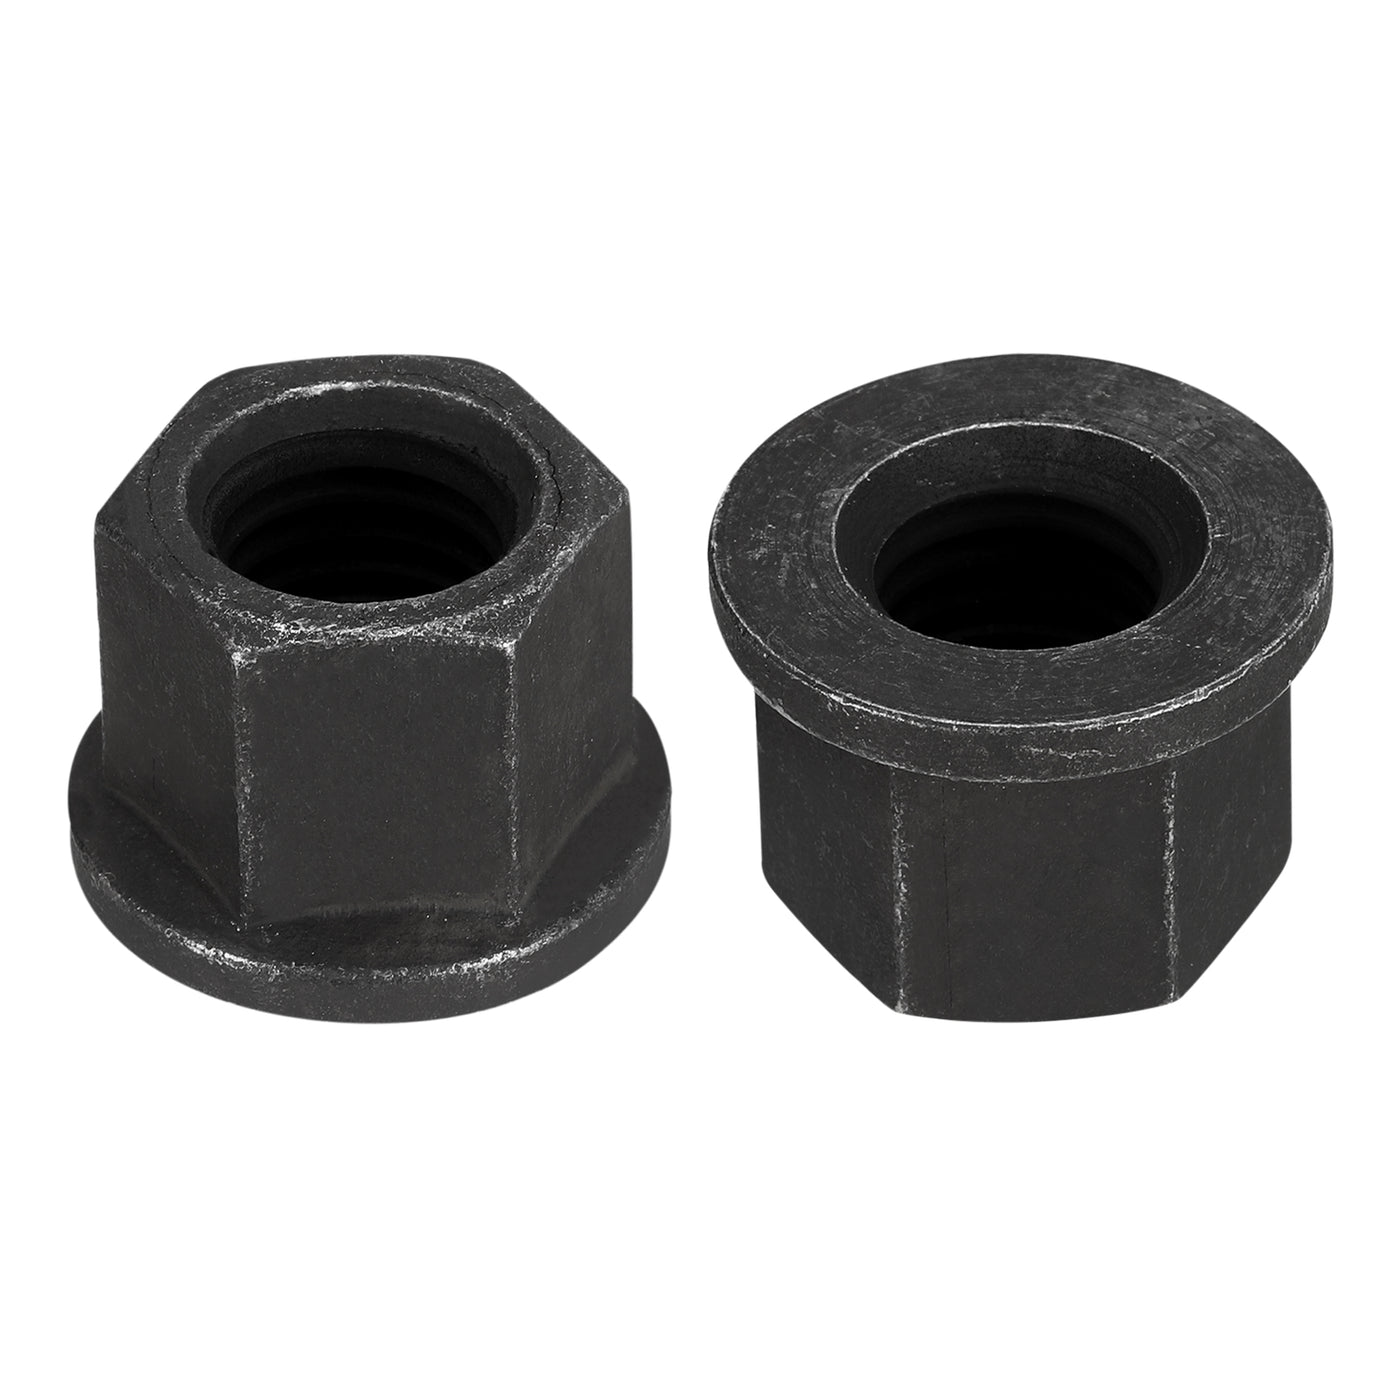 uxcell Uxcell M18 Flange Hex Lock Nuts, 2pcs Grade 8.8 Carbon Steel Hex Flange Nuts